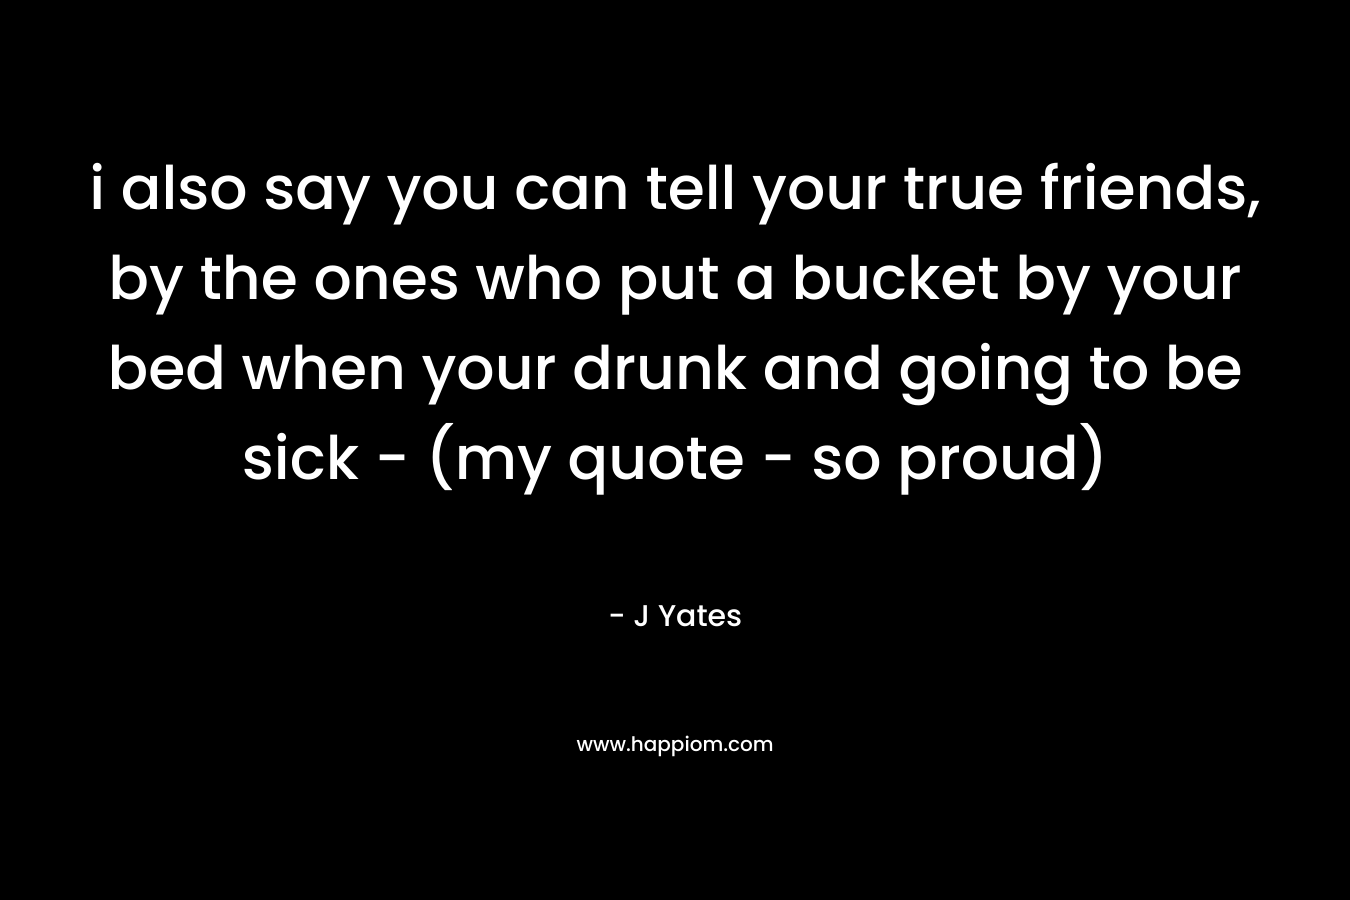 i also say you can tell your true friends, by the ones who put a bucket by your bed when your drunk and going to be sick - (my quote - so proud)